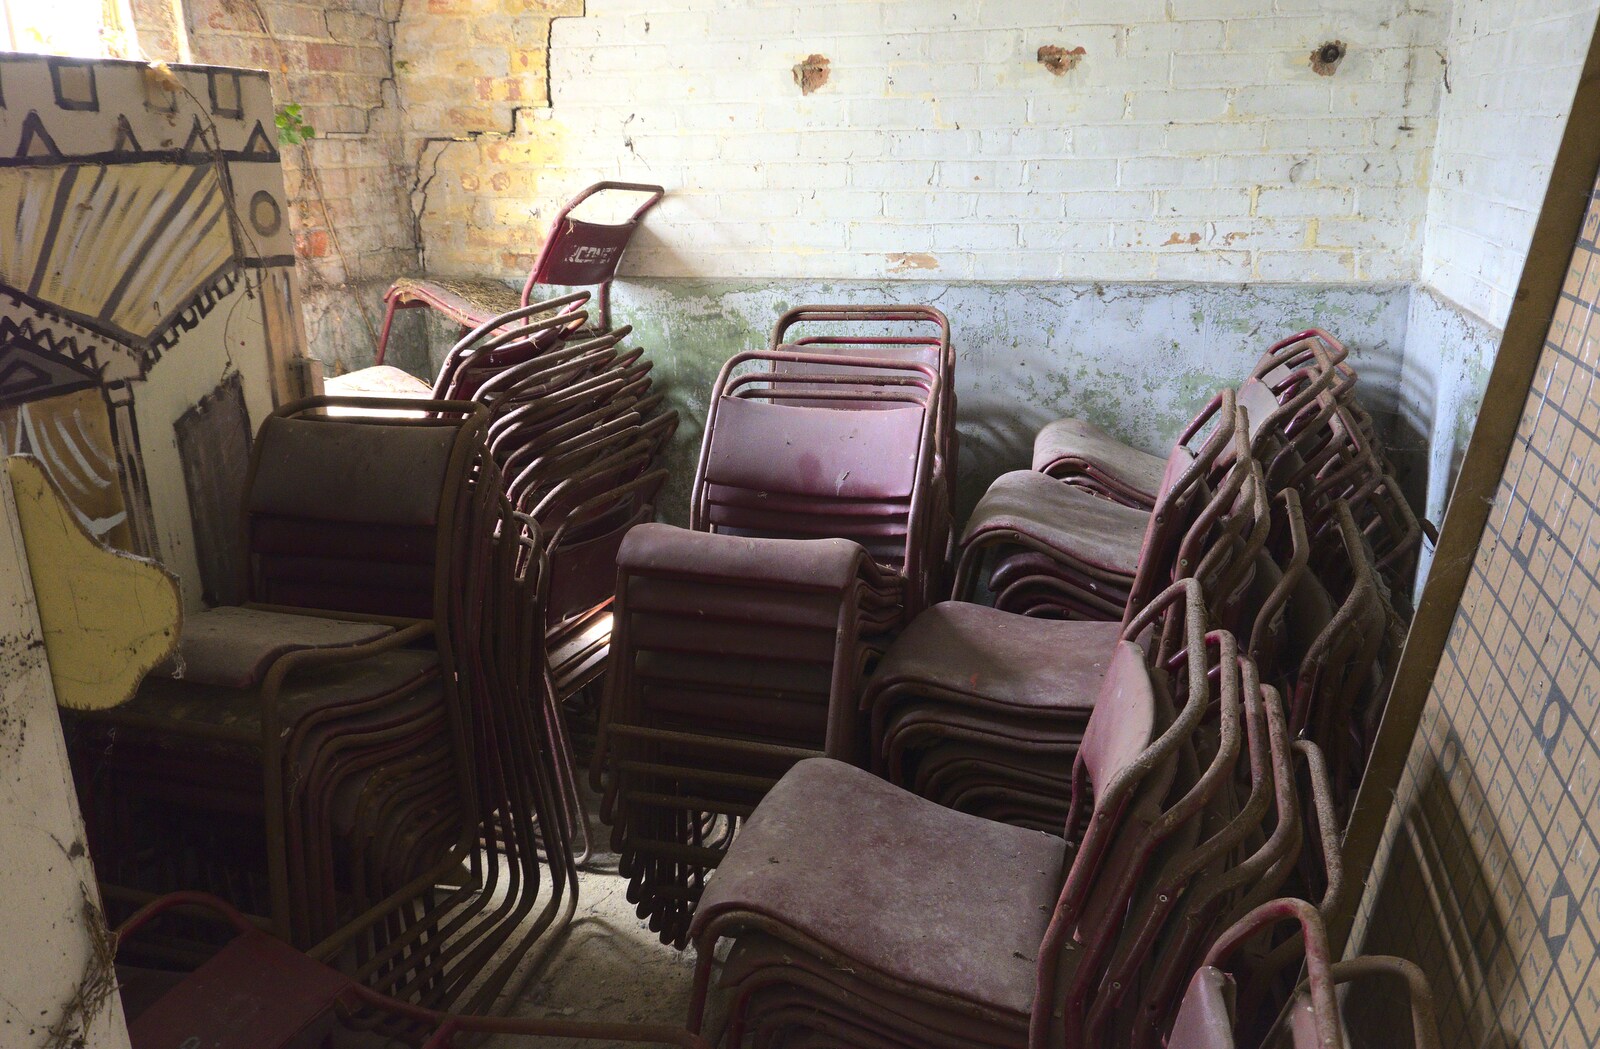 Piles of chairs from A 1940s Timewarp, Site 4, Bungay Airfield, Flixton, Suffolk - 9th June 2022